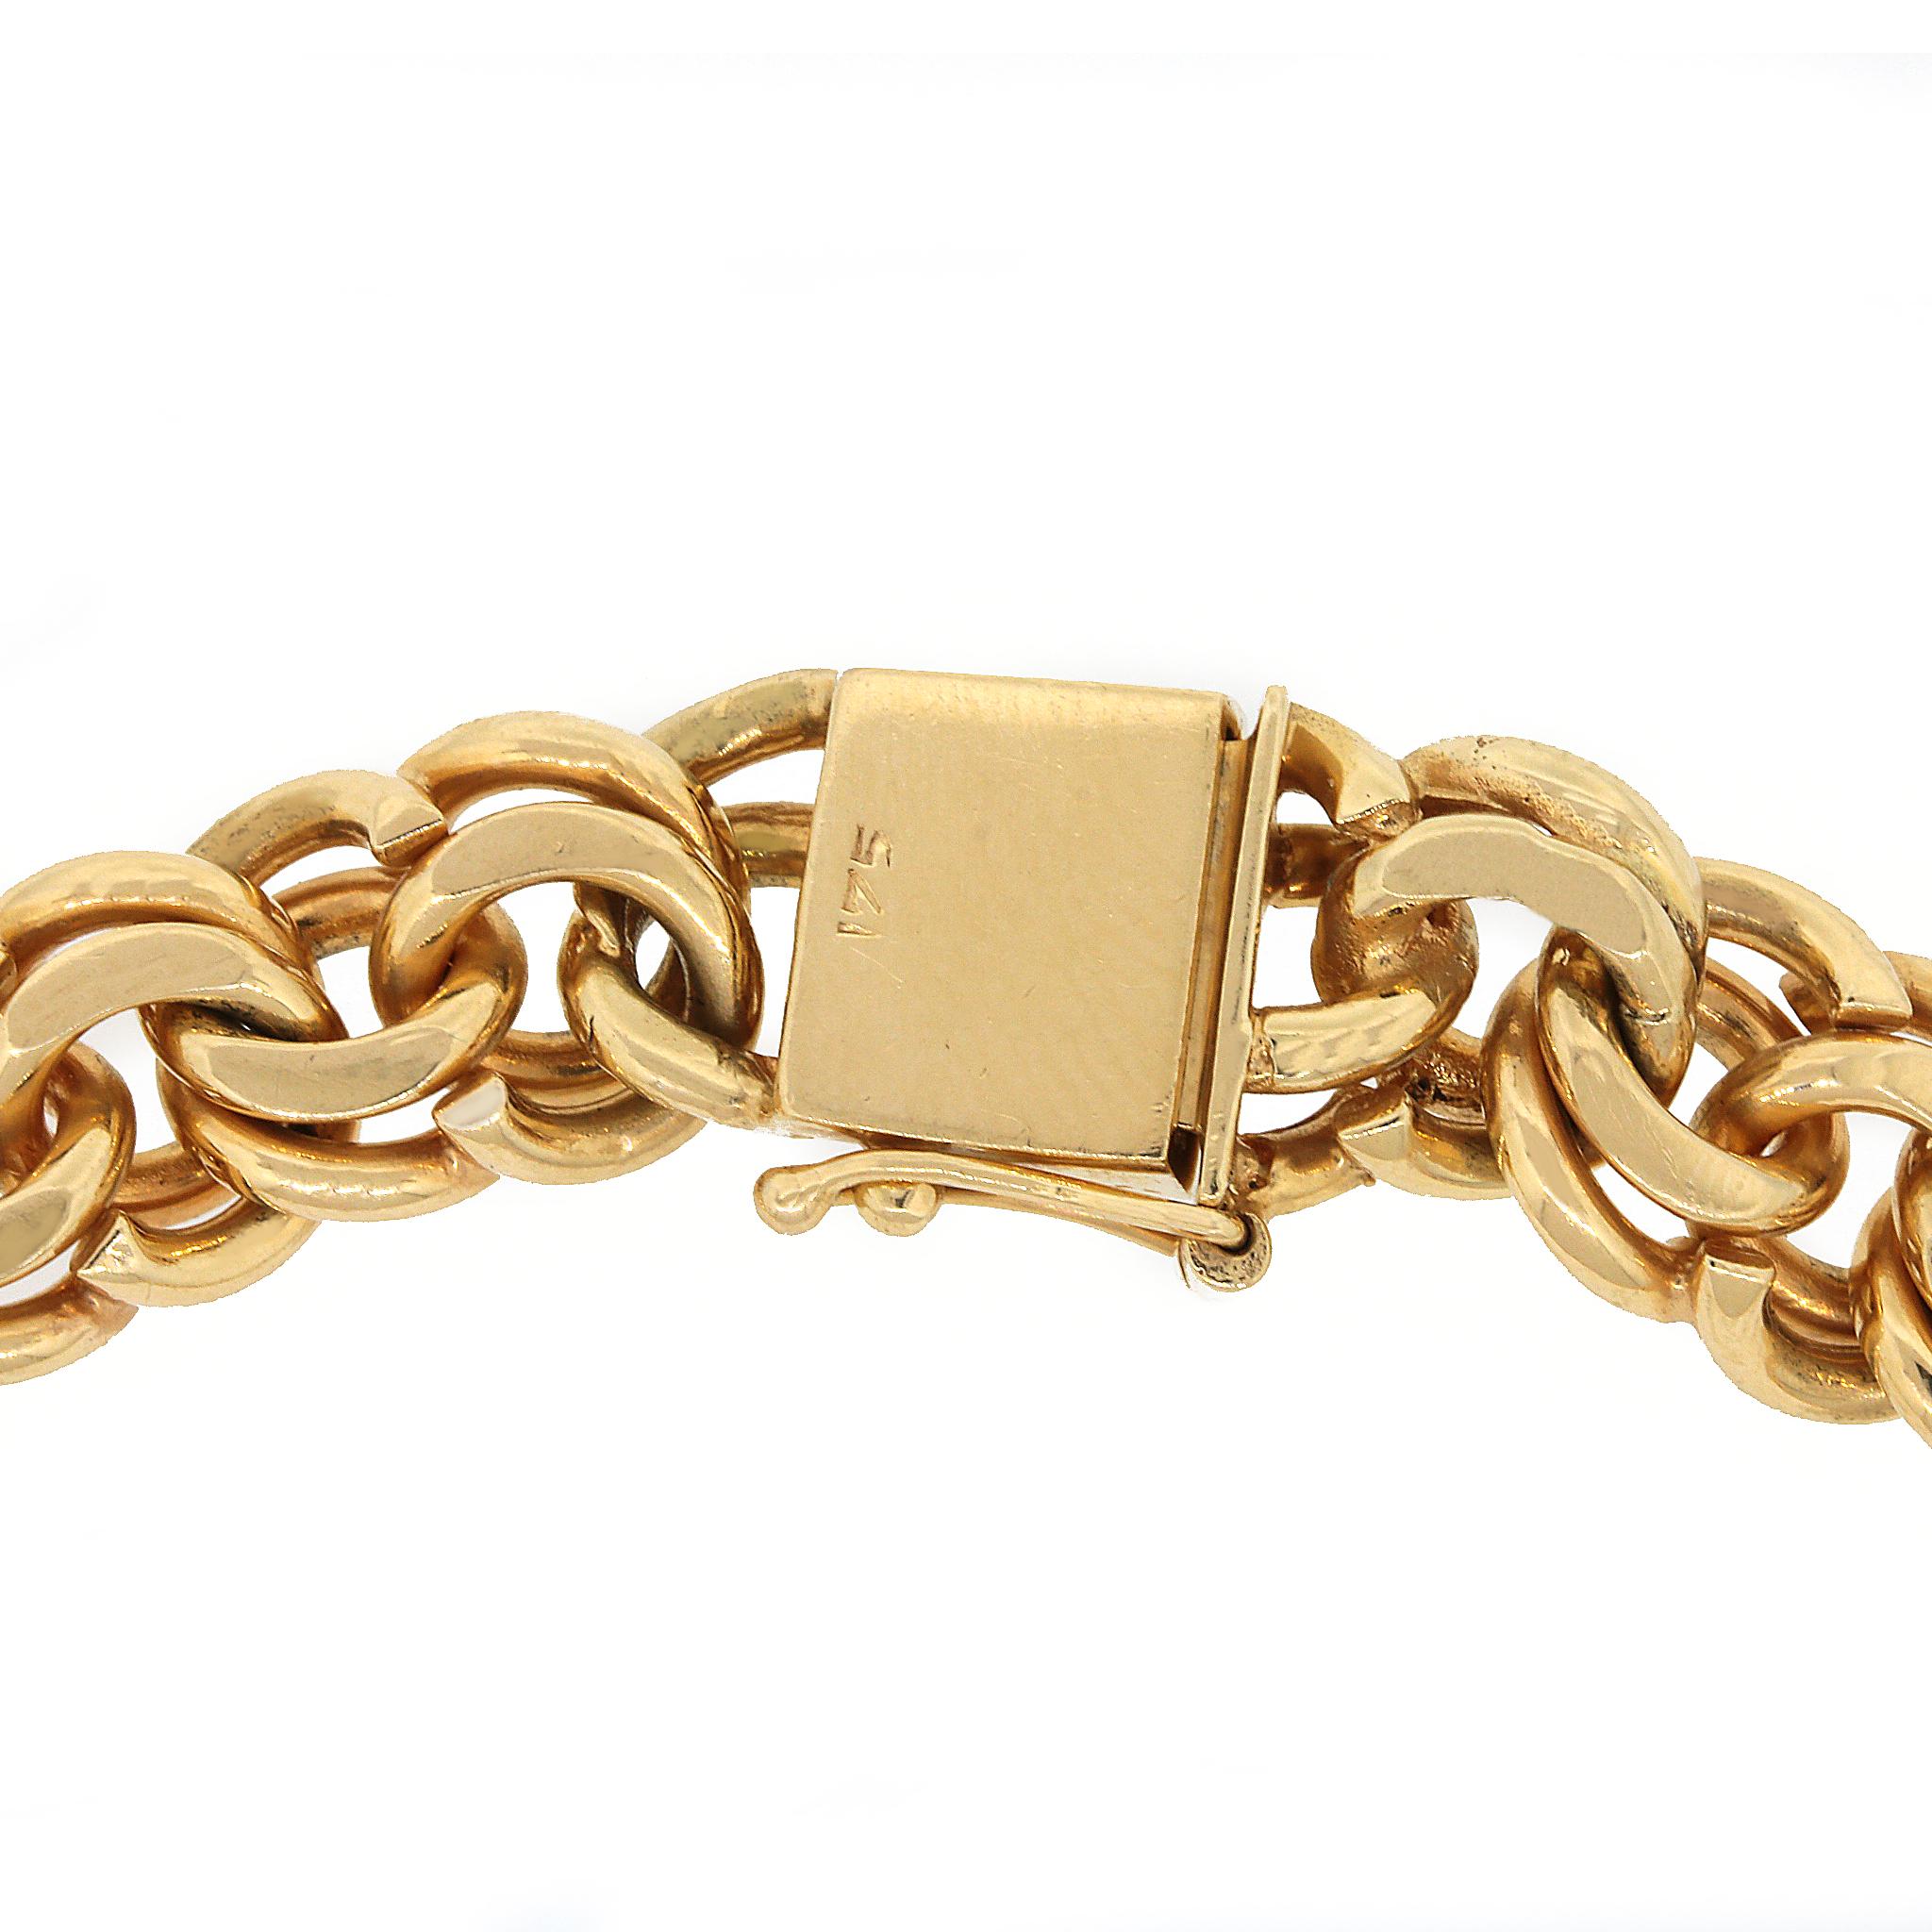 14 kt Yellow Gold
Chain Length: 16 inches
Total Weight: 111 grams